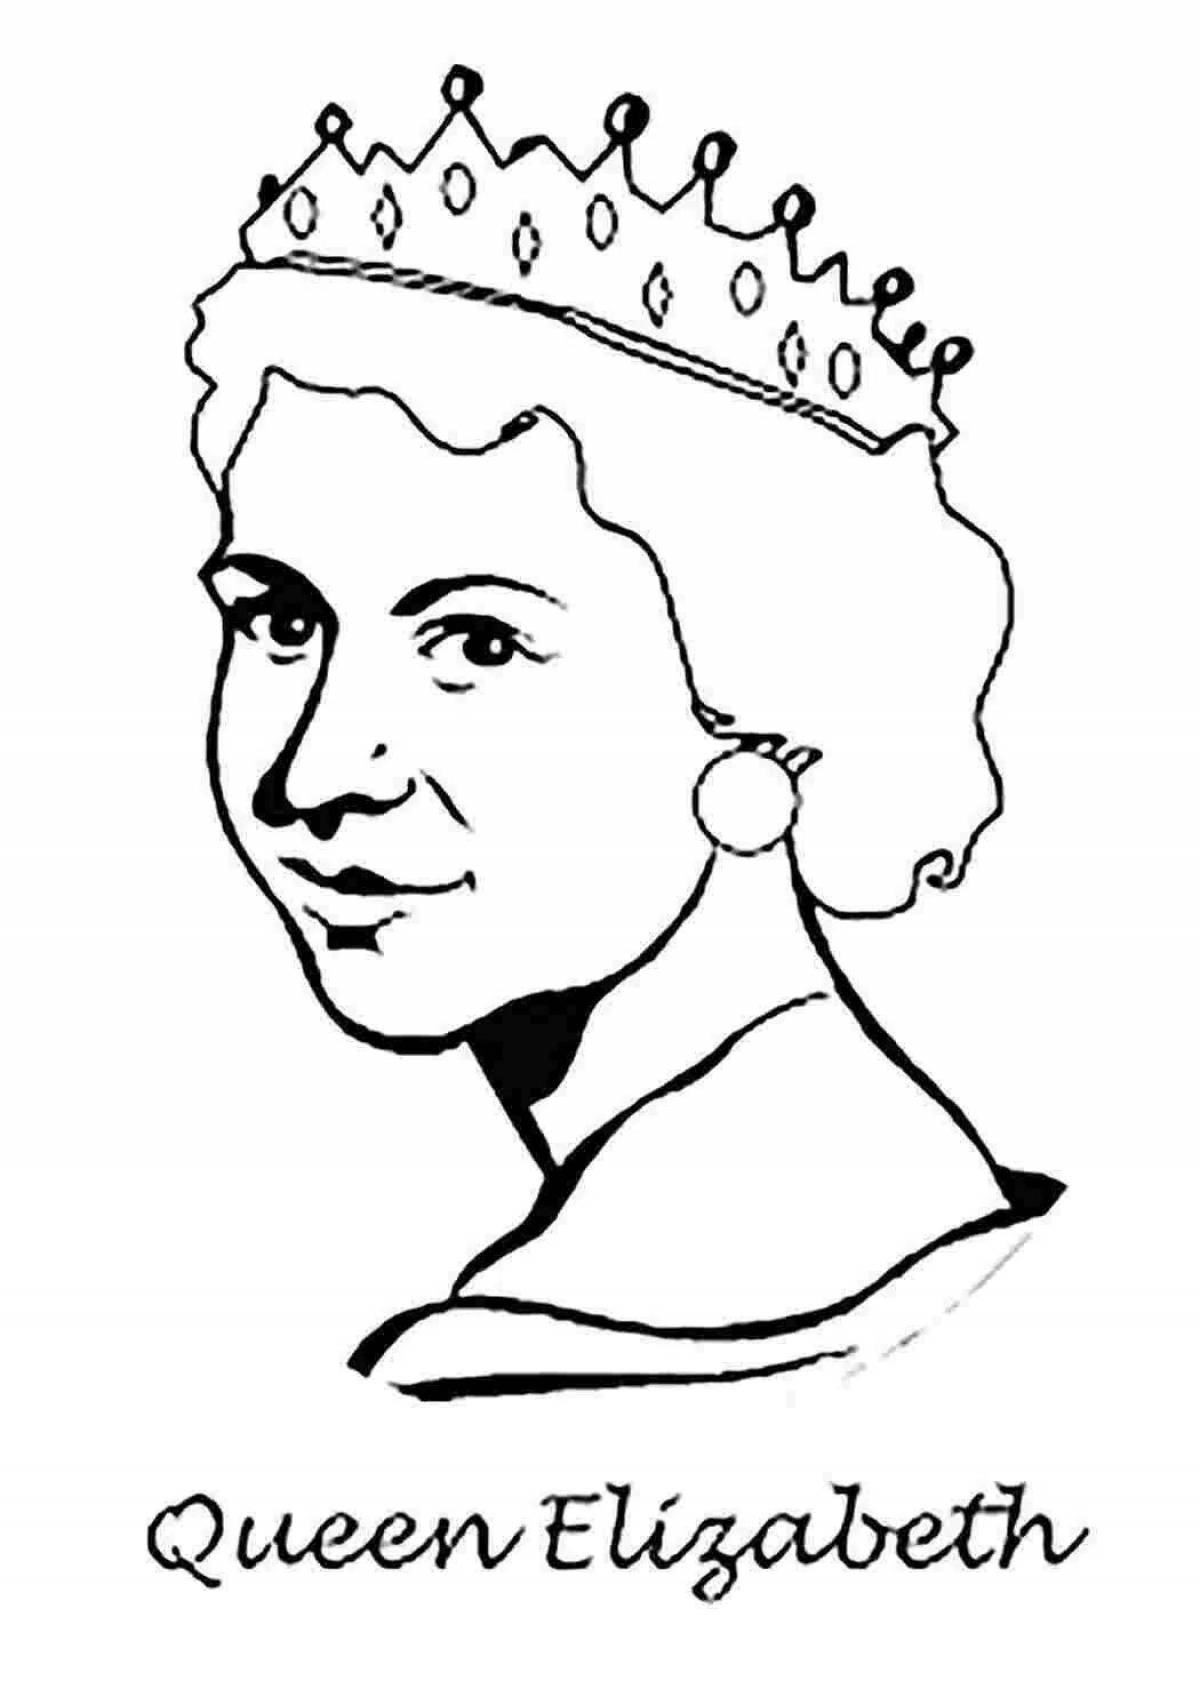 Victoria's playful coloring page